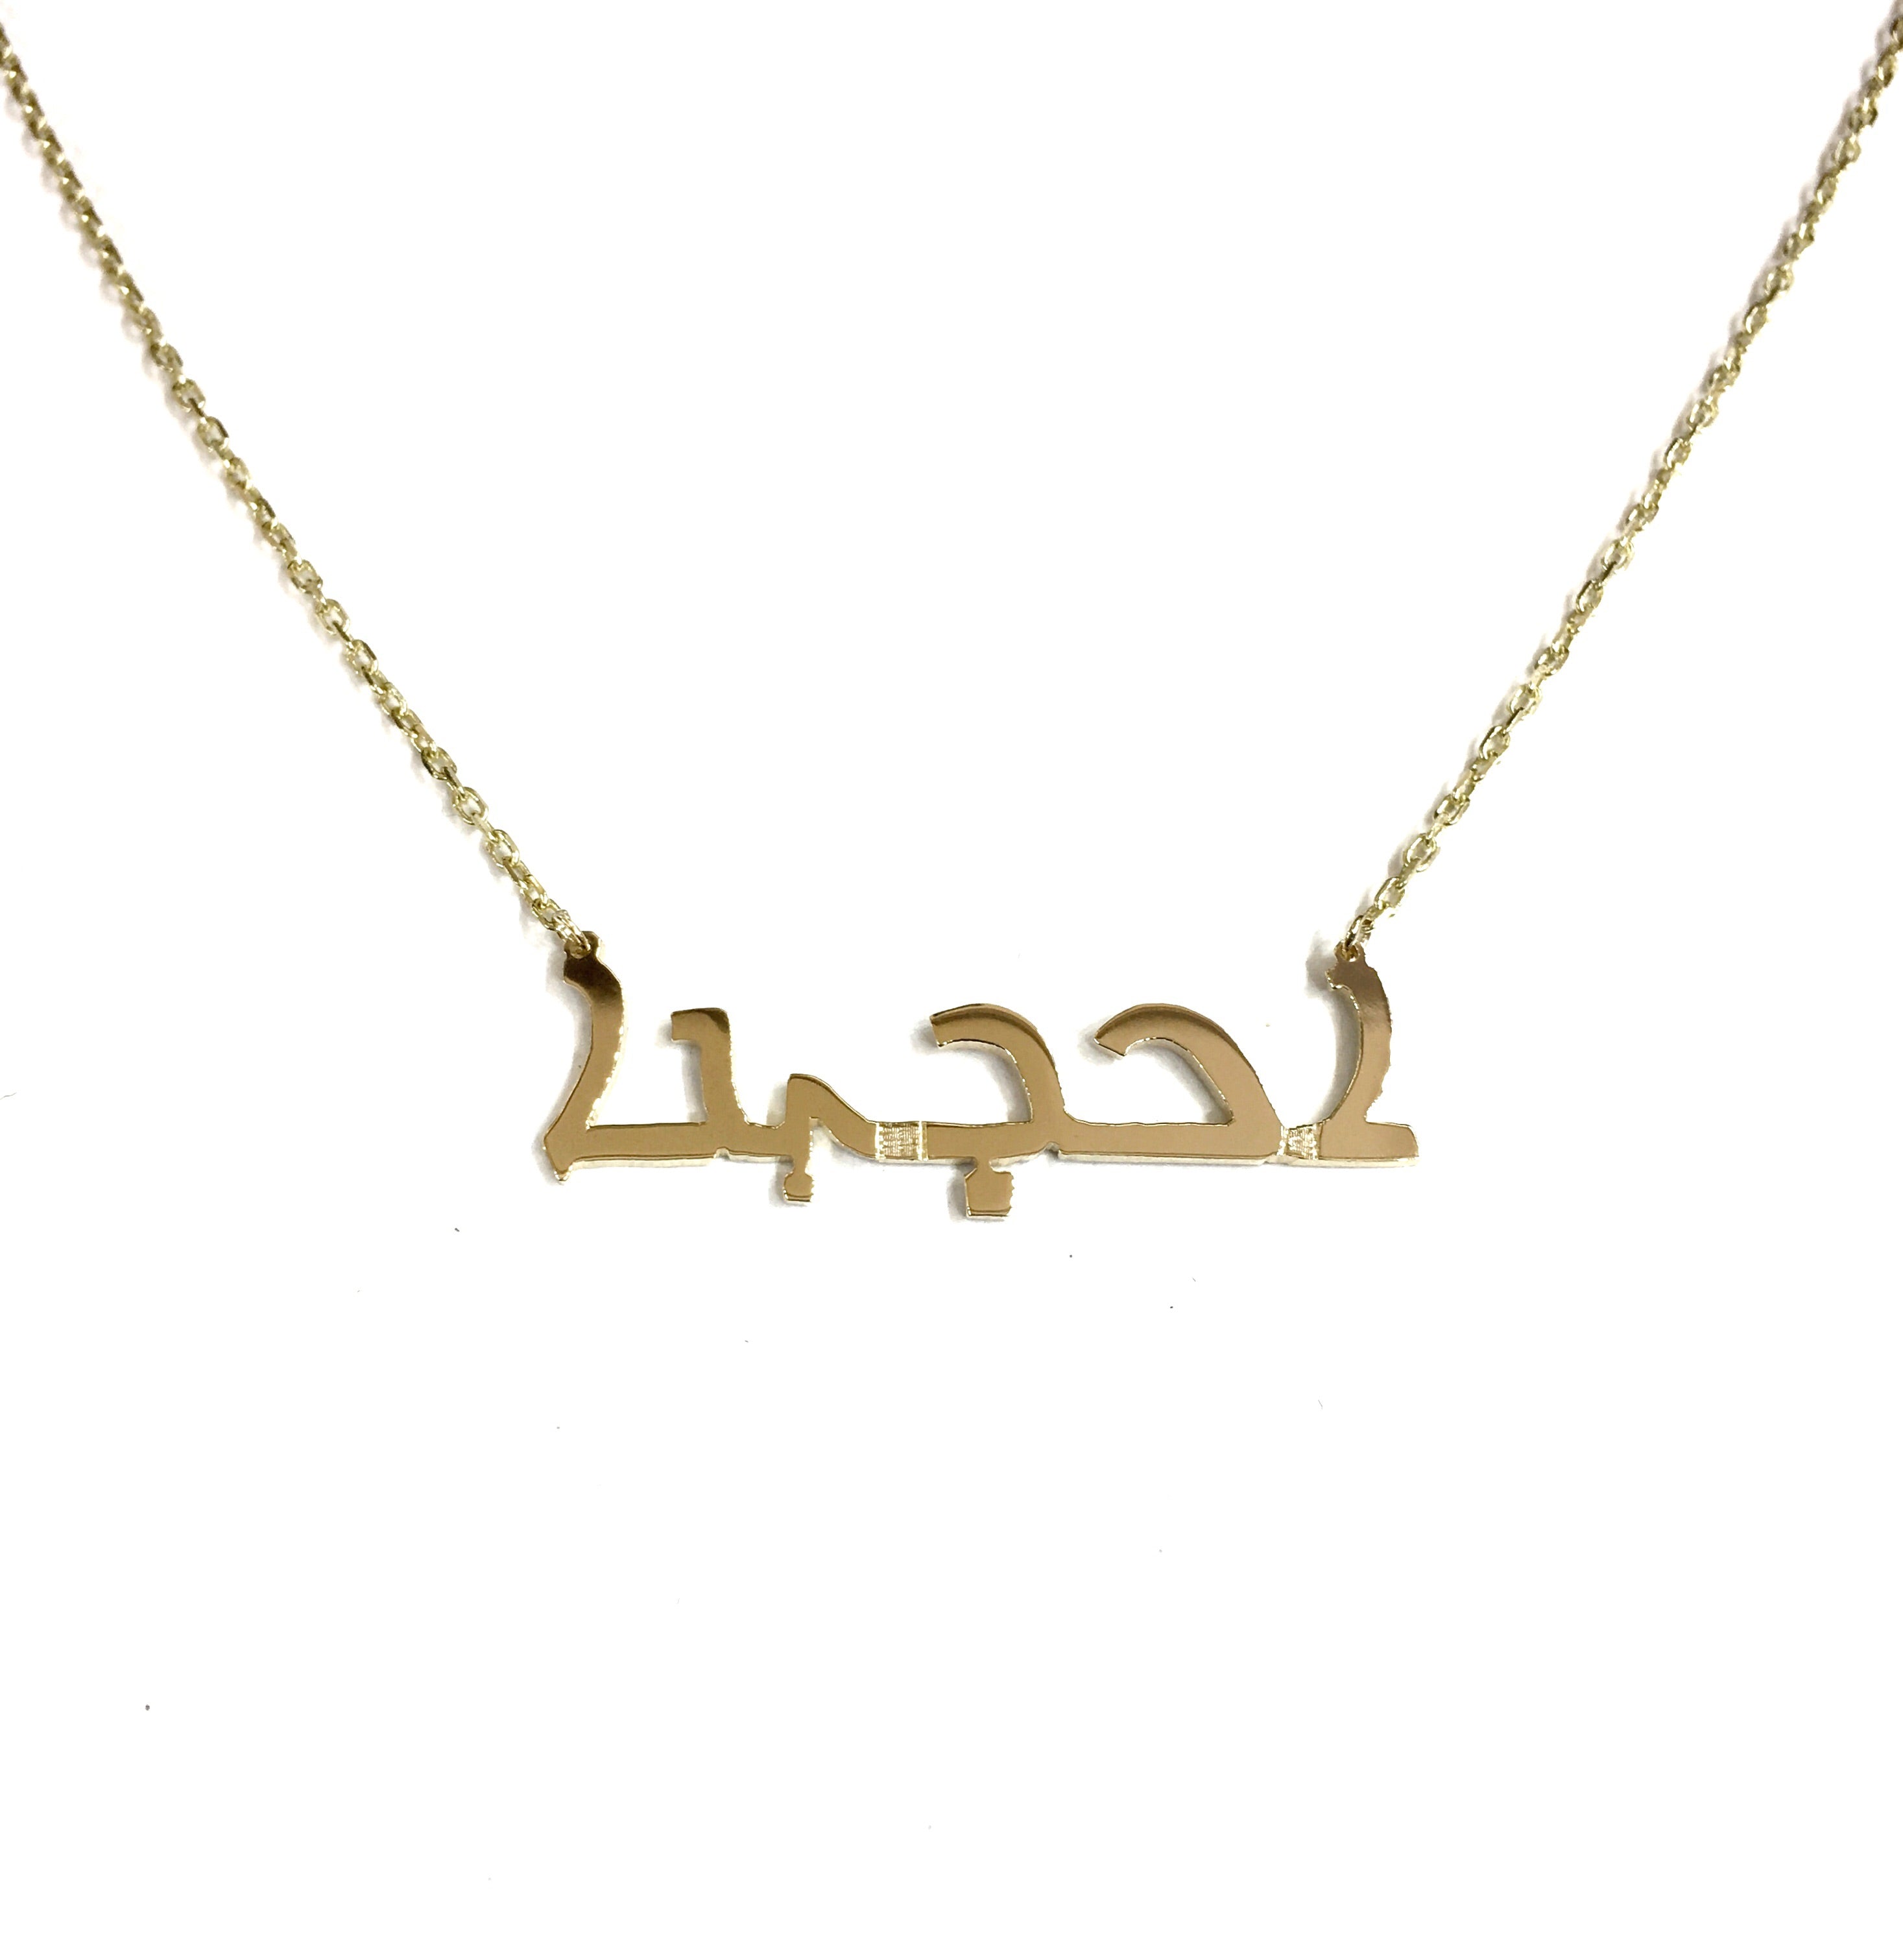 14K YELLOW GOLD ARABIC FLOATING NAME NECKLACE